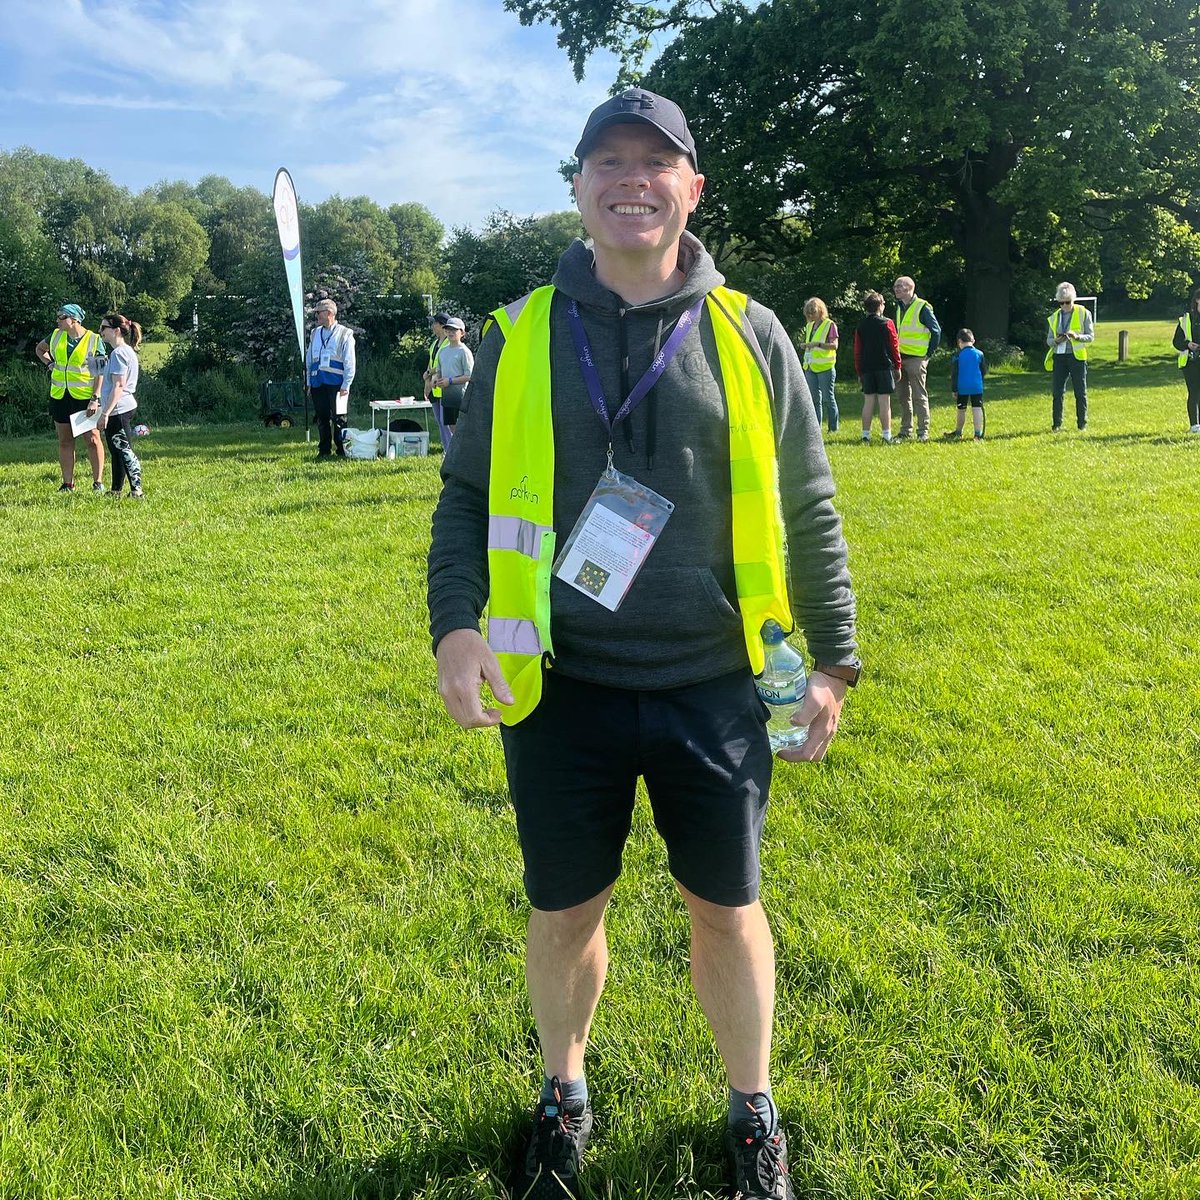 This is going to be the space that I use to process, share and discuss my #BowelCancer journey. 8 days post surgery to remove ‘Terry’ and I’m up and mobile and volunteered at the kids ParkRun yesterday. On we go!